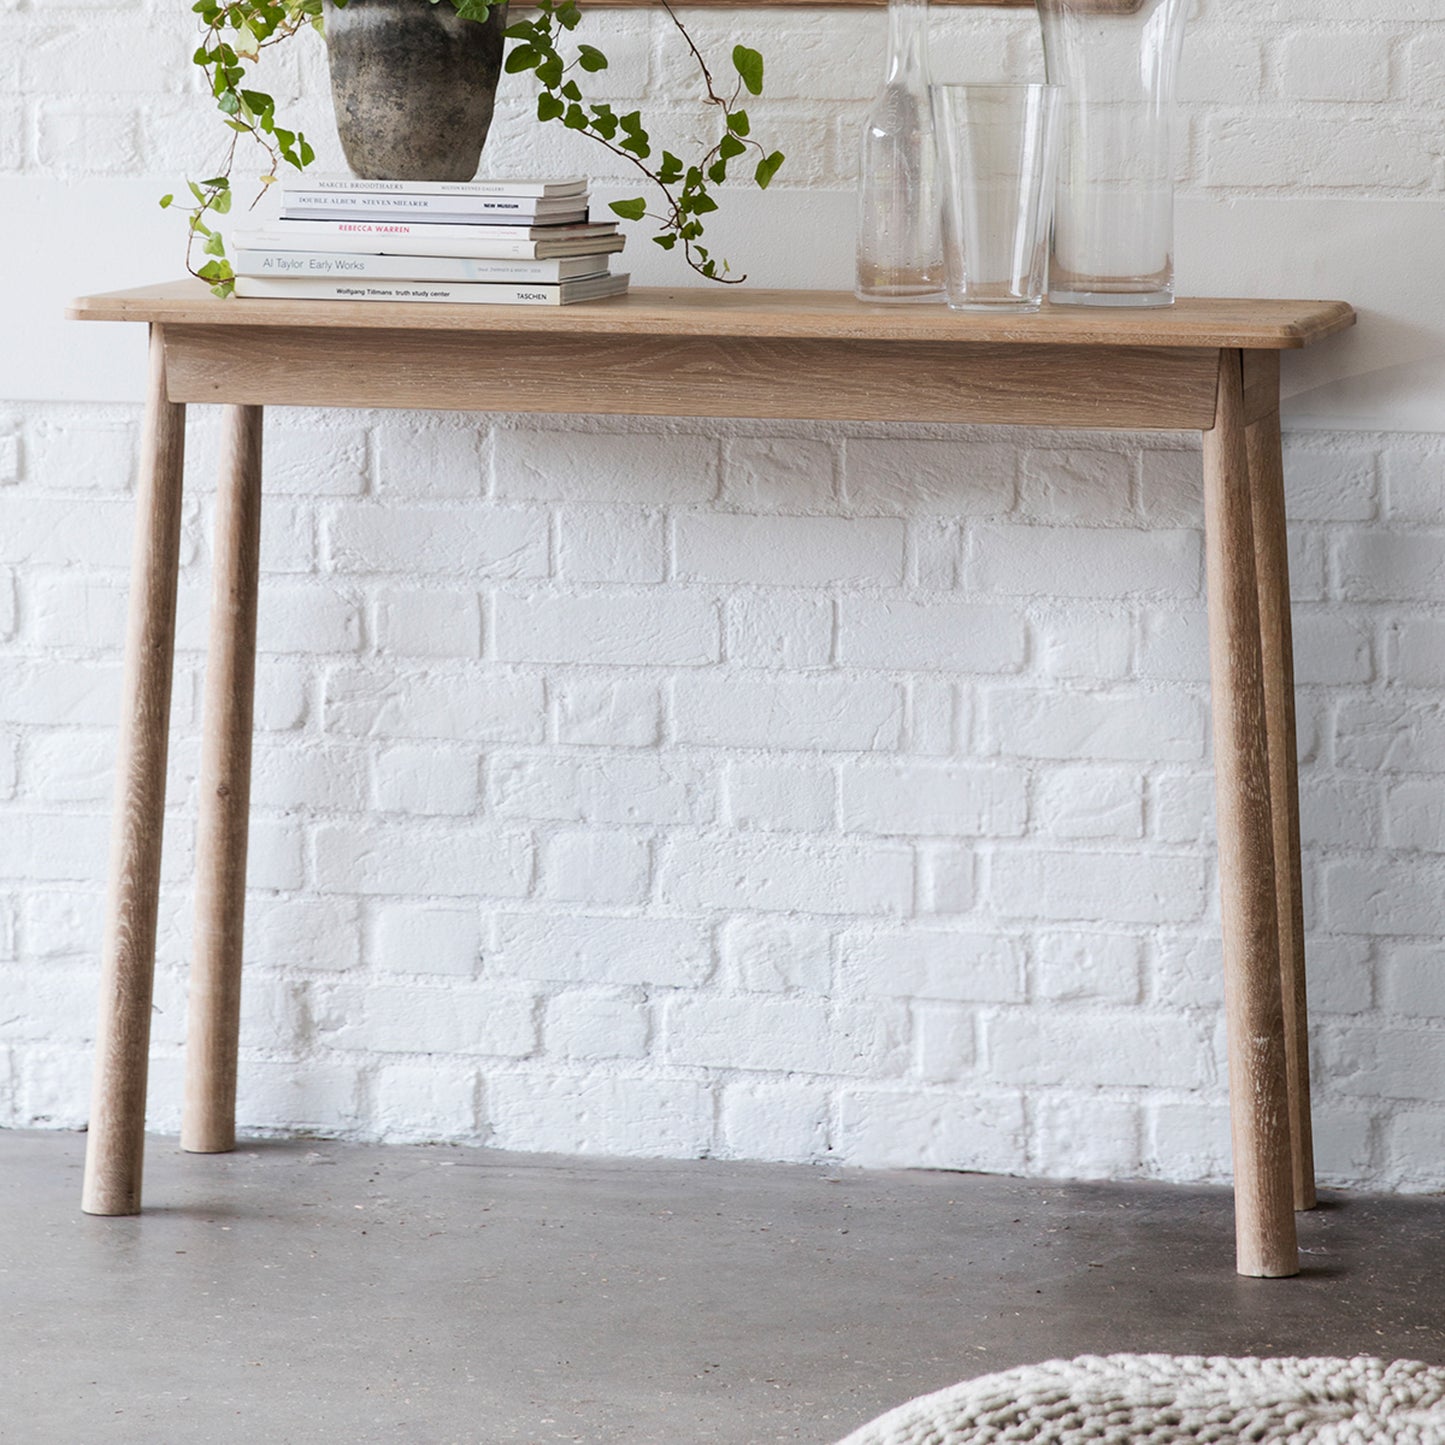 A Tigley Console Table 1100x400x800mm with a plant on it, perfect for home furniture and interior decor from Kikiathome.co.uk.